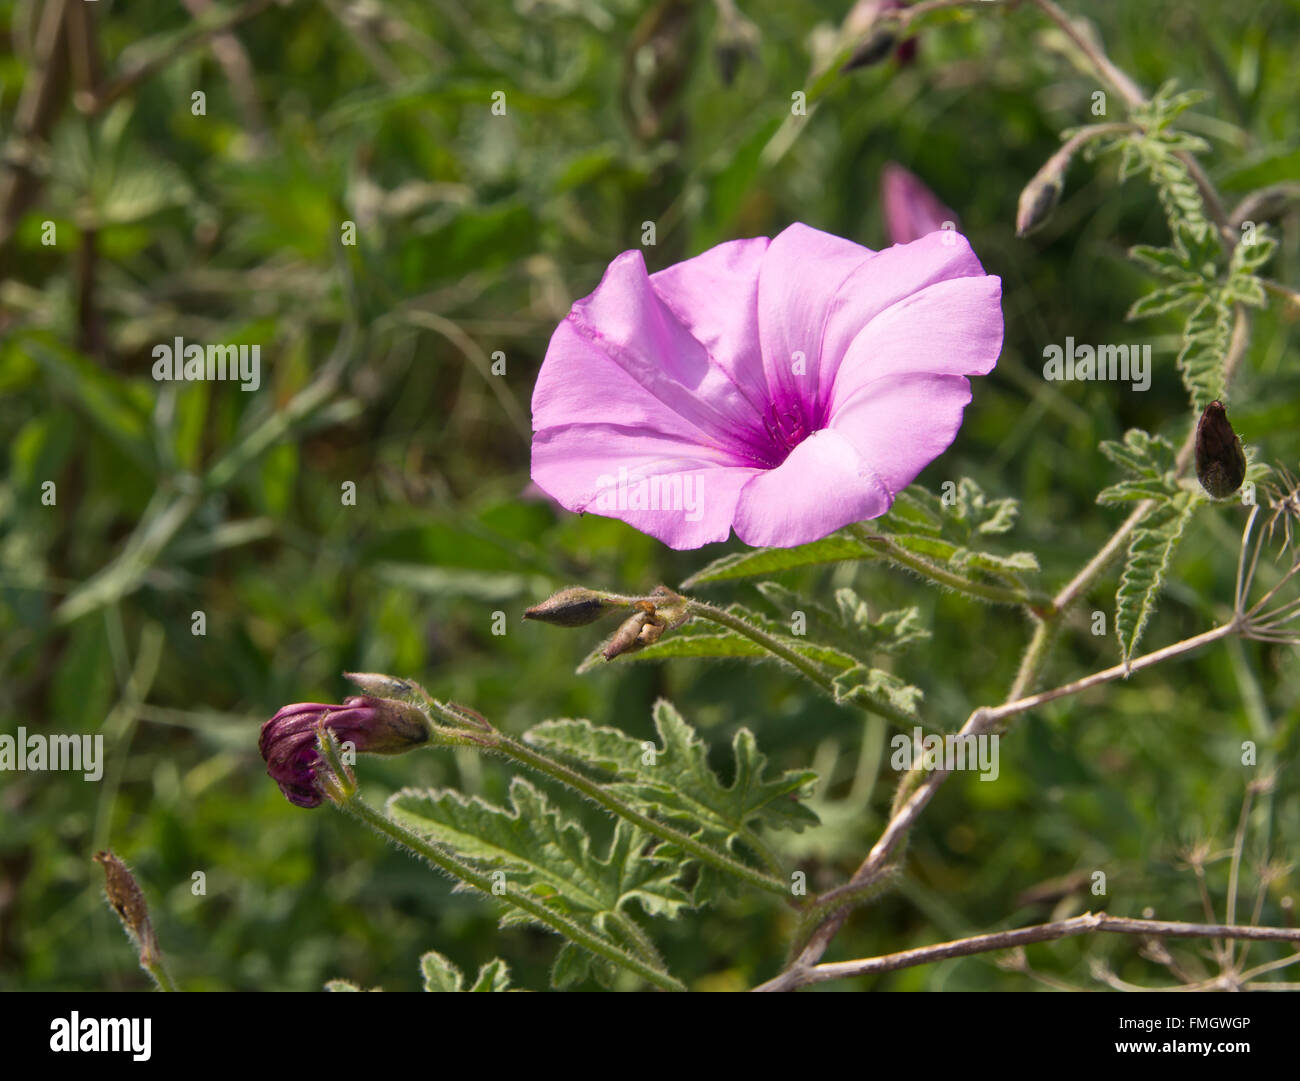 Convolvulus althaeoides , mallow bindweed, close up of pink flower and stem in the bright Tenerife sunlight Stock Photo